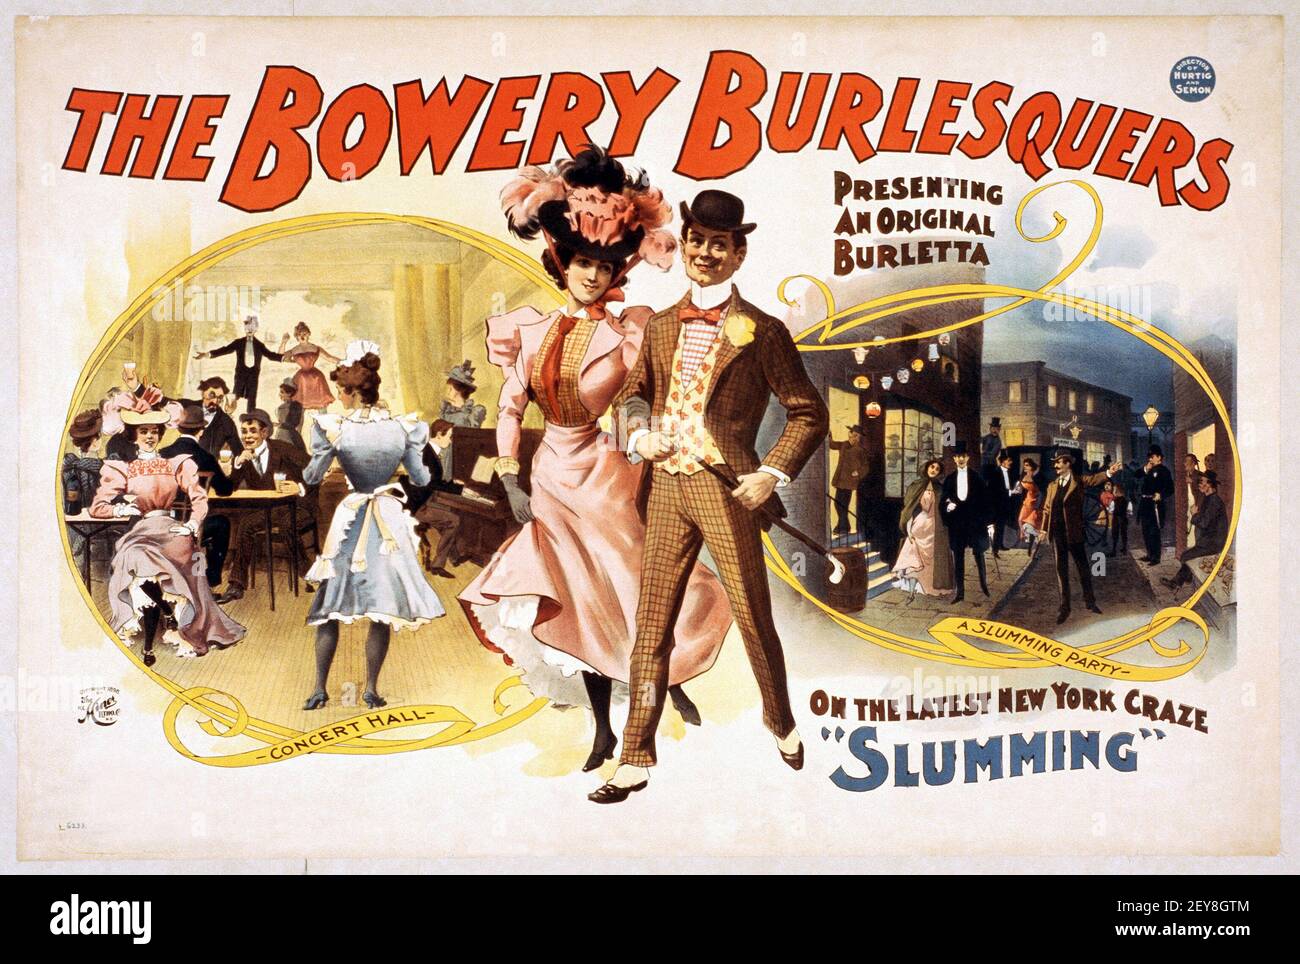 The Bowery Burlesquers. Presenting an original Burletta. On the last New York Craze 'Slumming'. Old and vintage style. Stock Photo